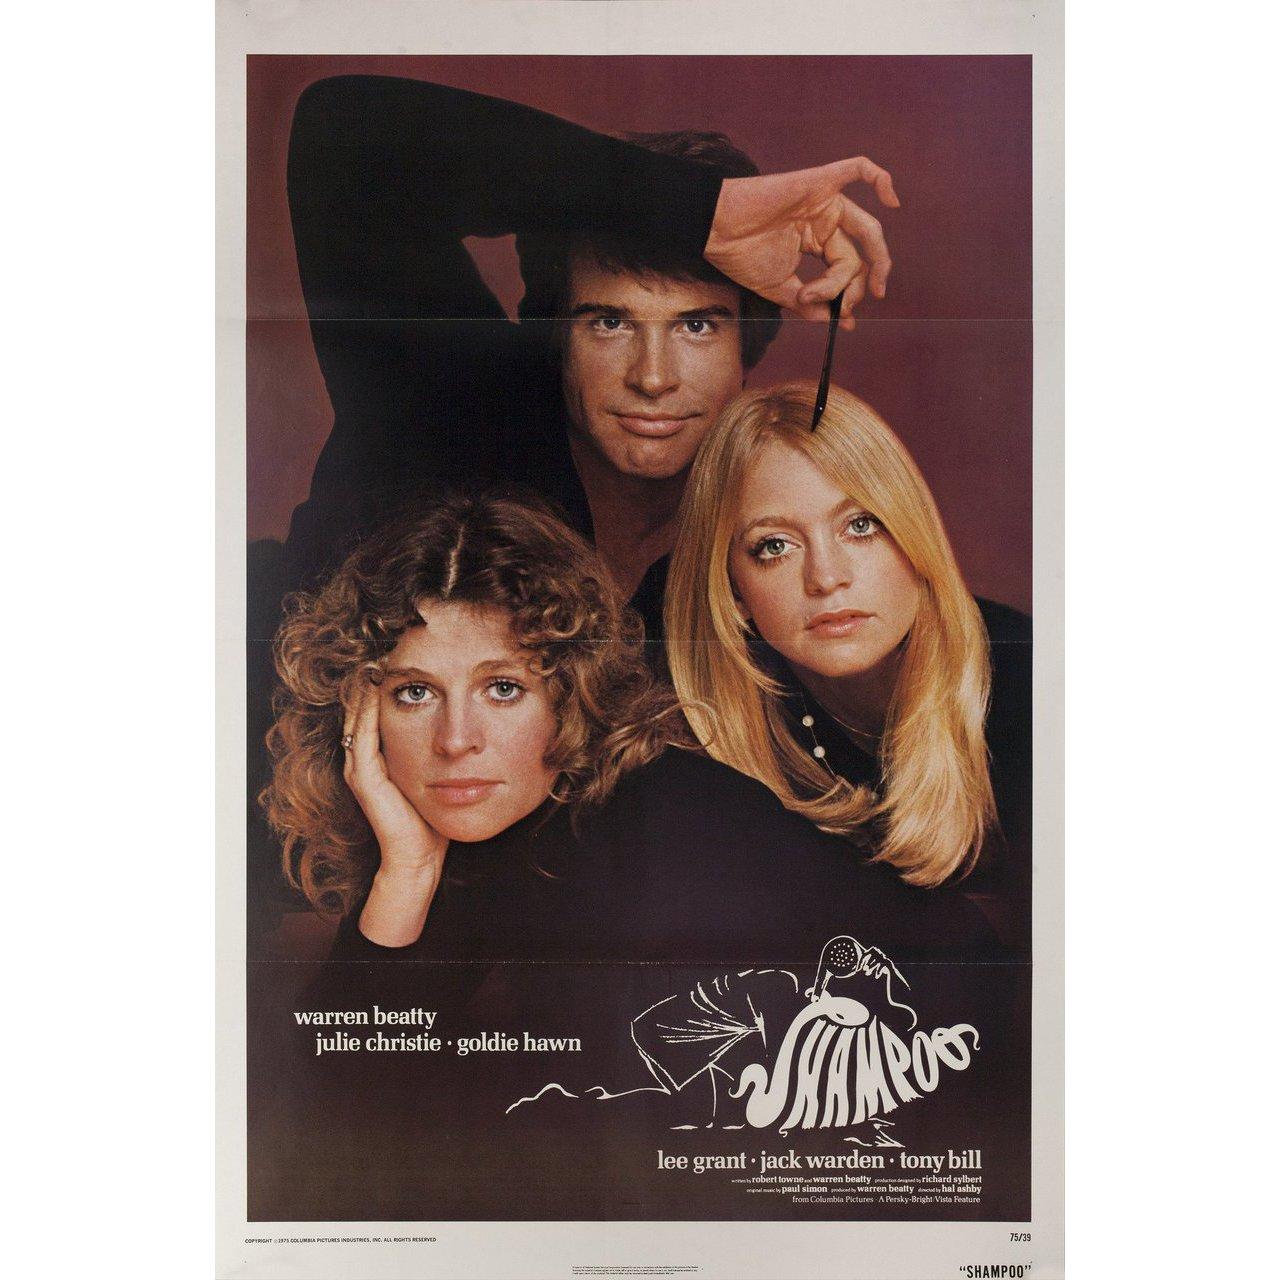 Original 1975 U.S. one sheet poster for the film Shampoo directed by Hal Ashby with Warren Beatty / Julie Christie / Goldie Hawn / Lee Grant. Fine condition, tri-fold. Many original posters were issued folded or were subsequently folded. Please